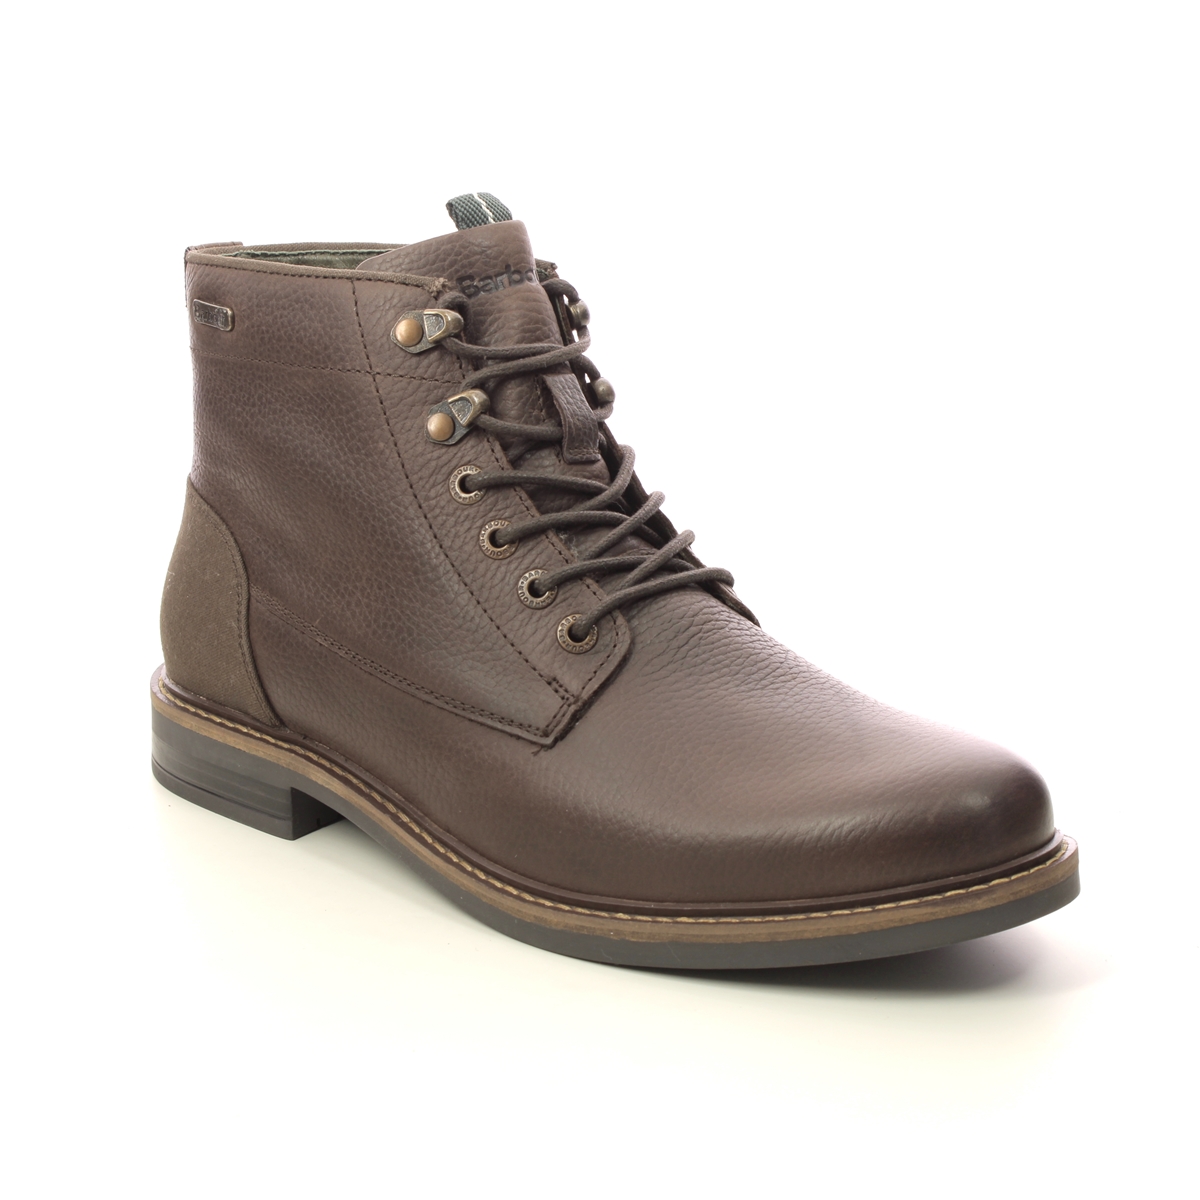 Barbour Deckham Derby Brown Leather Boots Mfo0644-Br77 In Size 11 In Plain Brown Leather